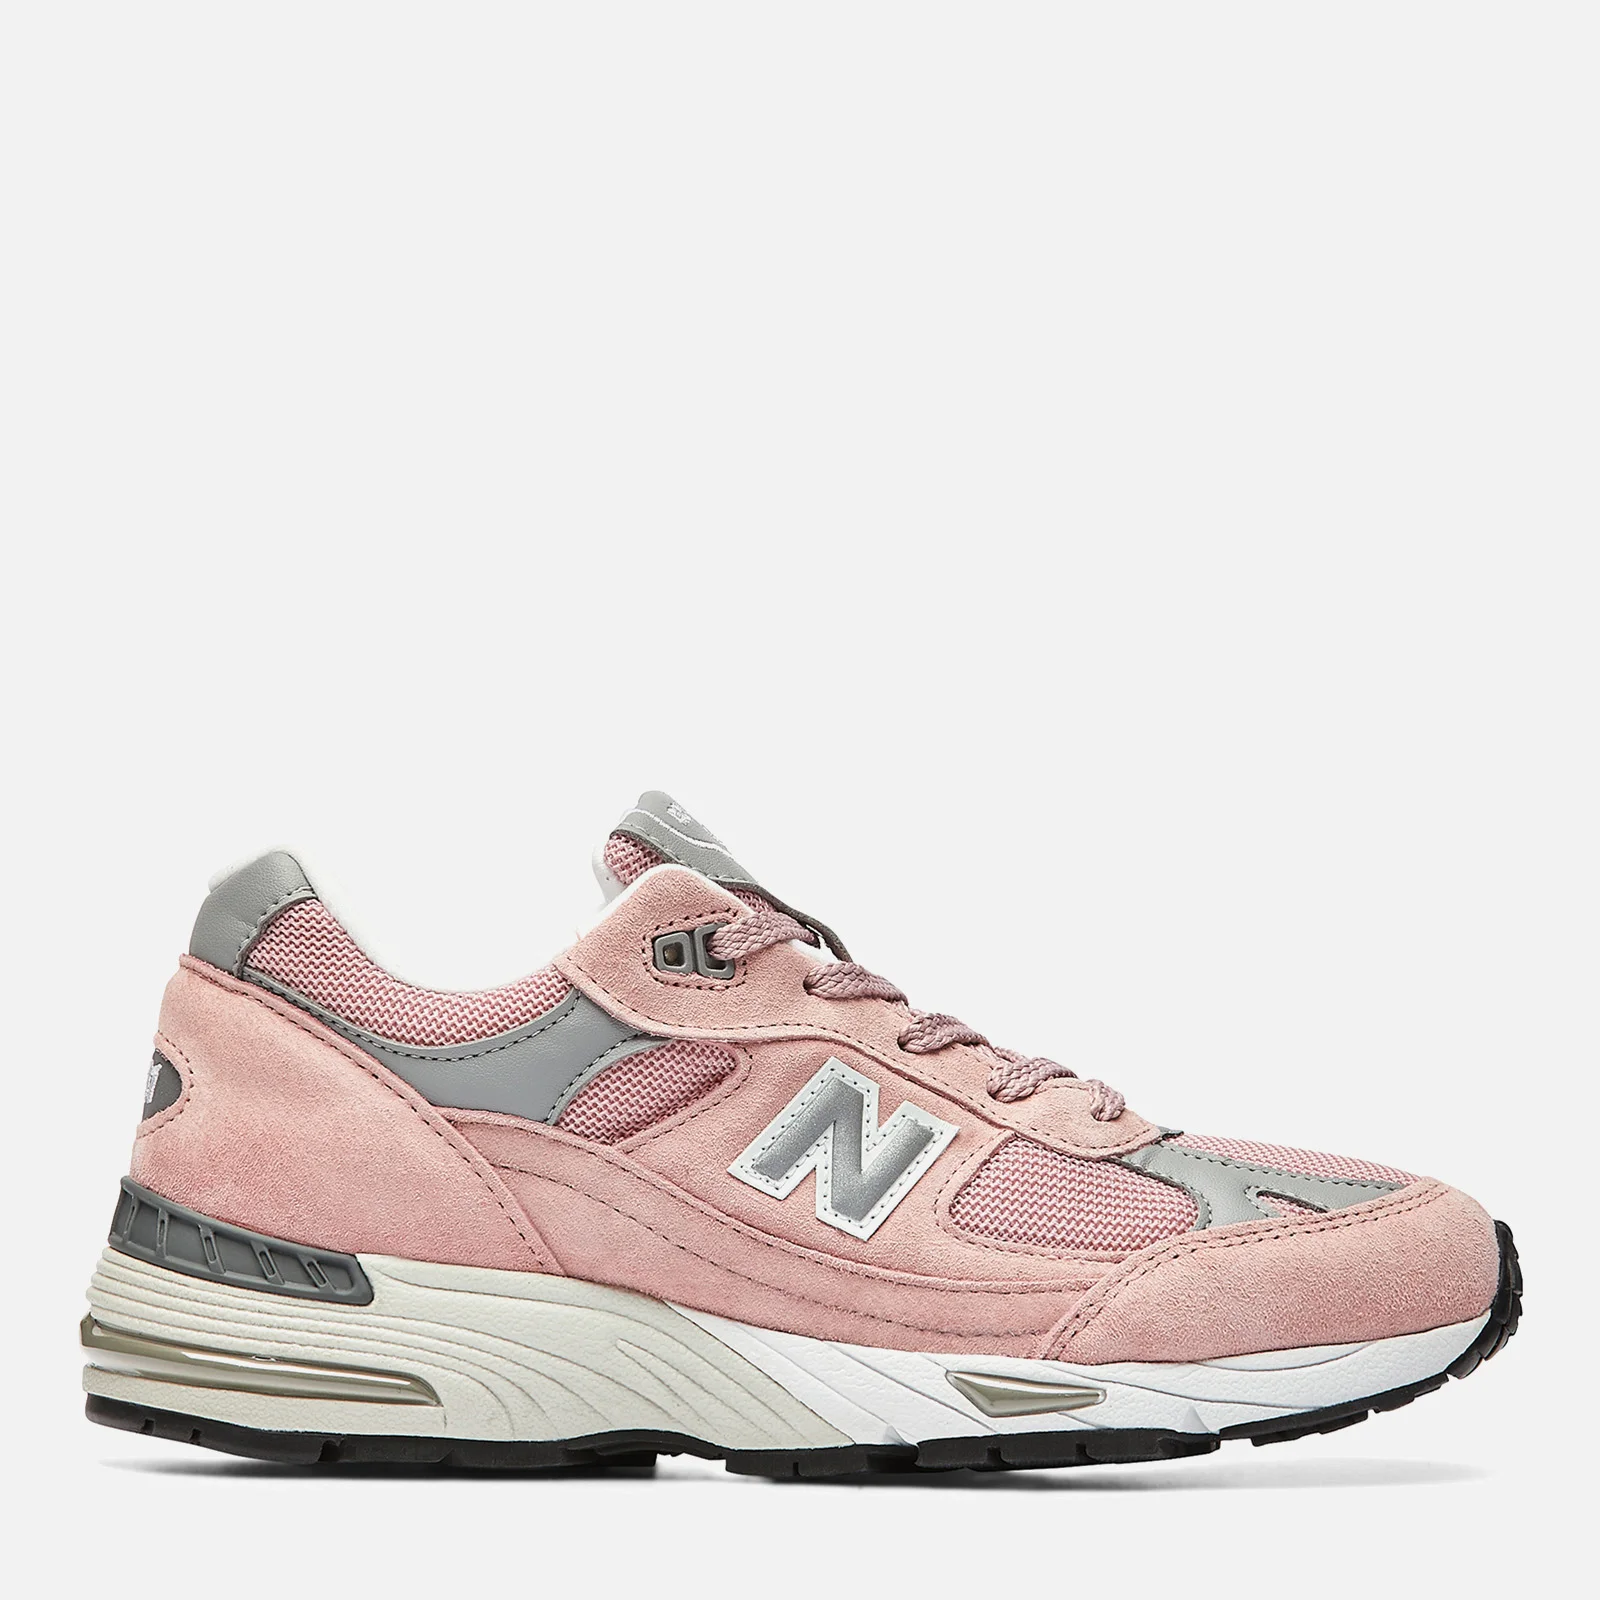 New Balance Womens's 991 Trainers - Pink/Grey Image 1